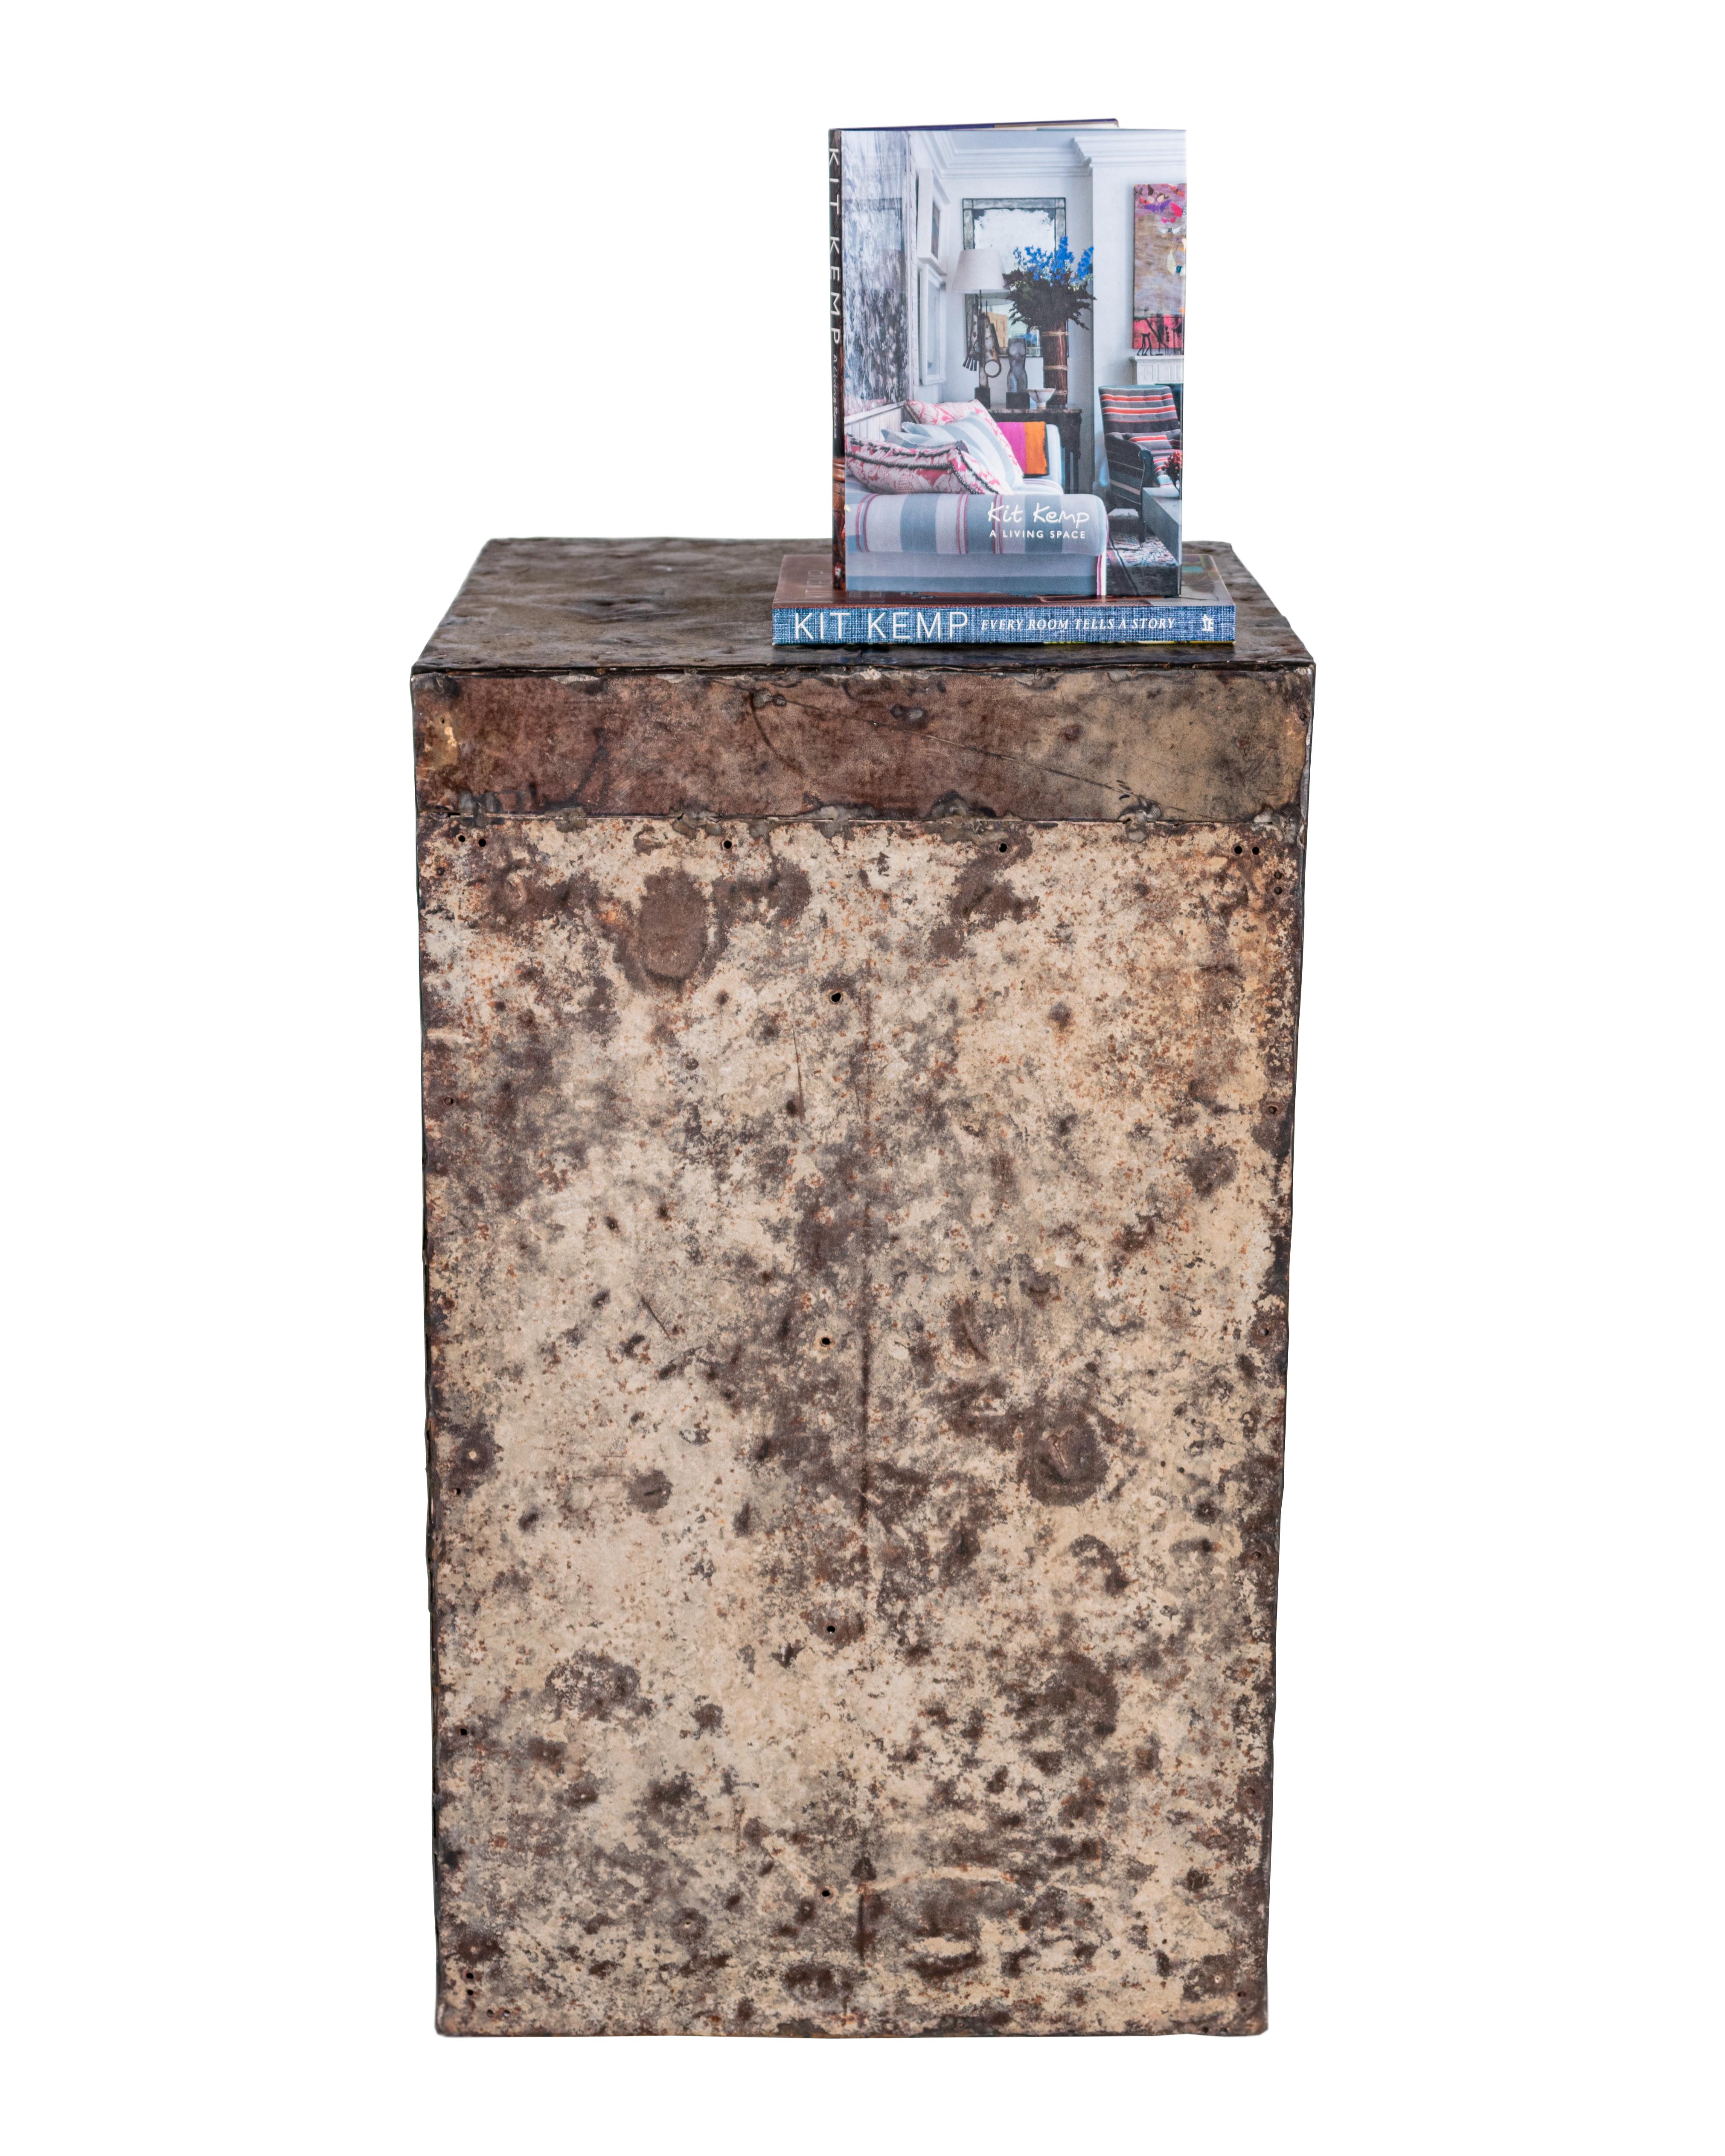 Rustic Display Plinth Fashioned from Repurposed Architectural Steel